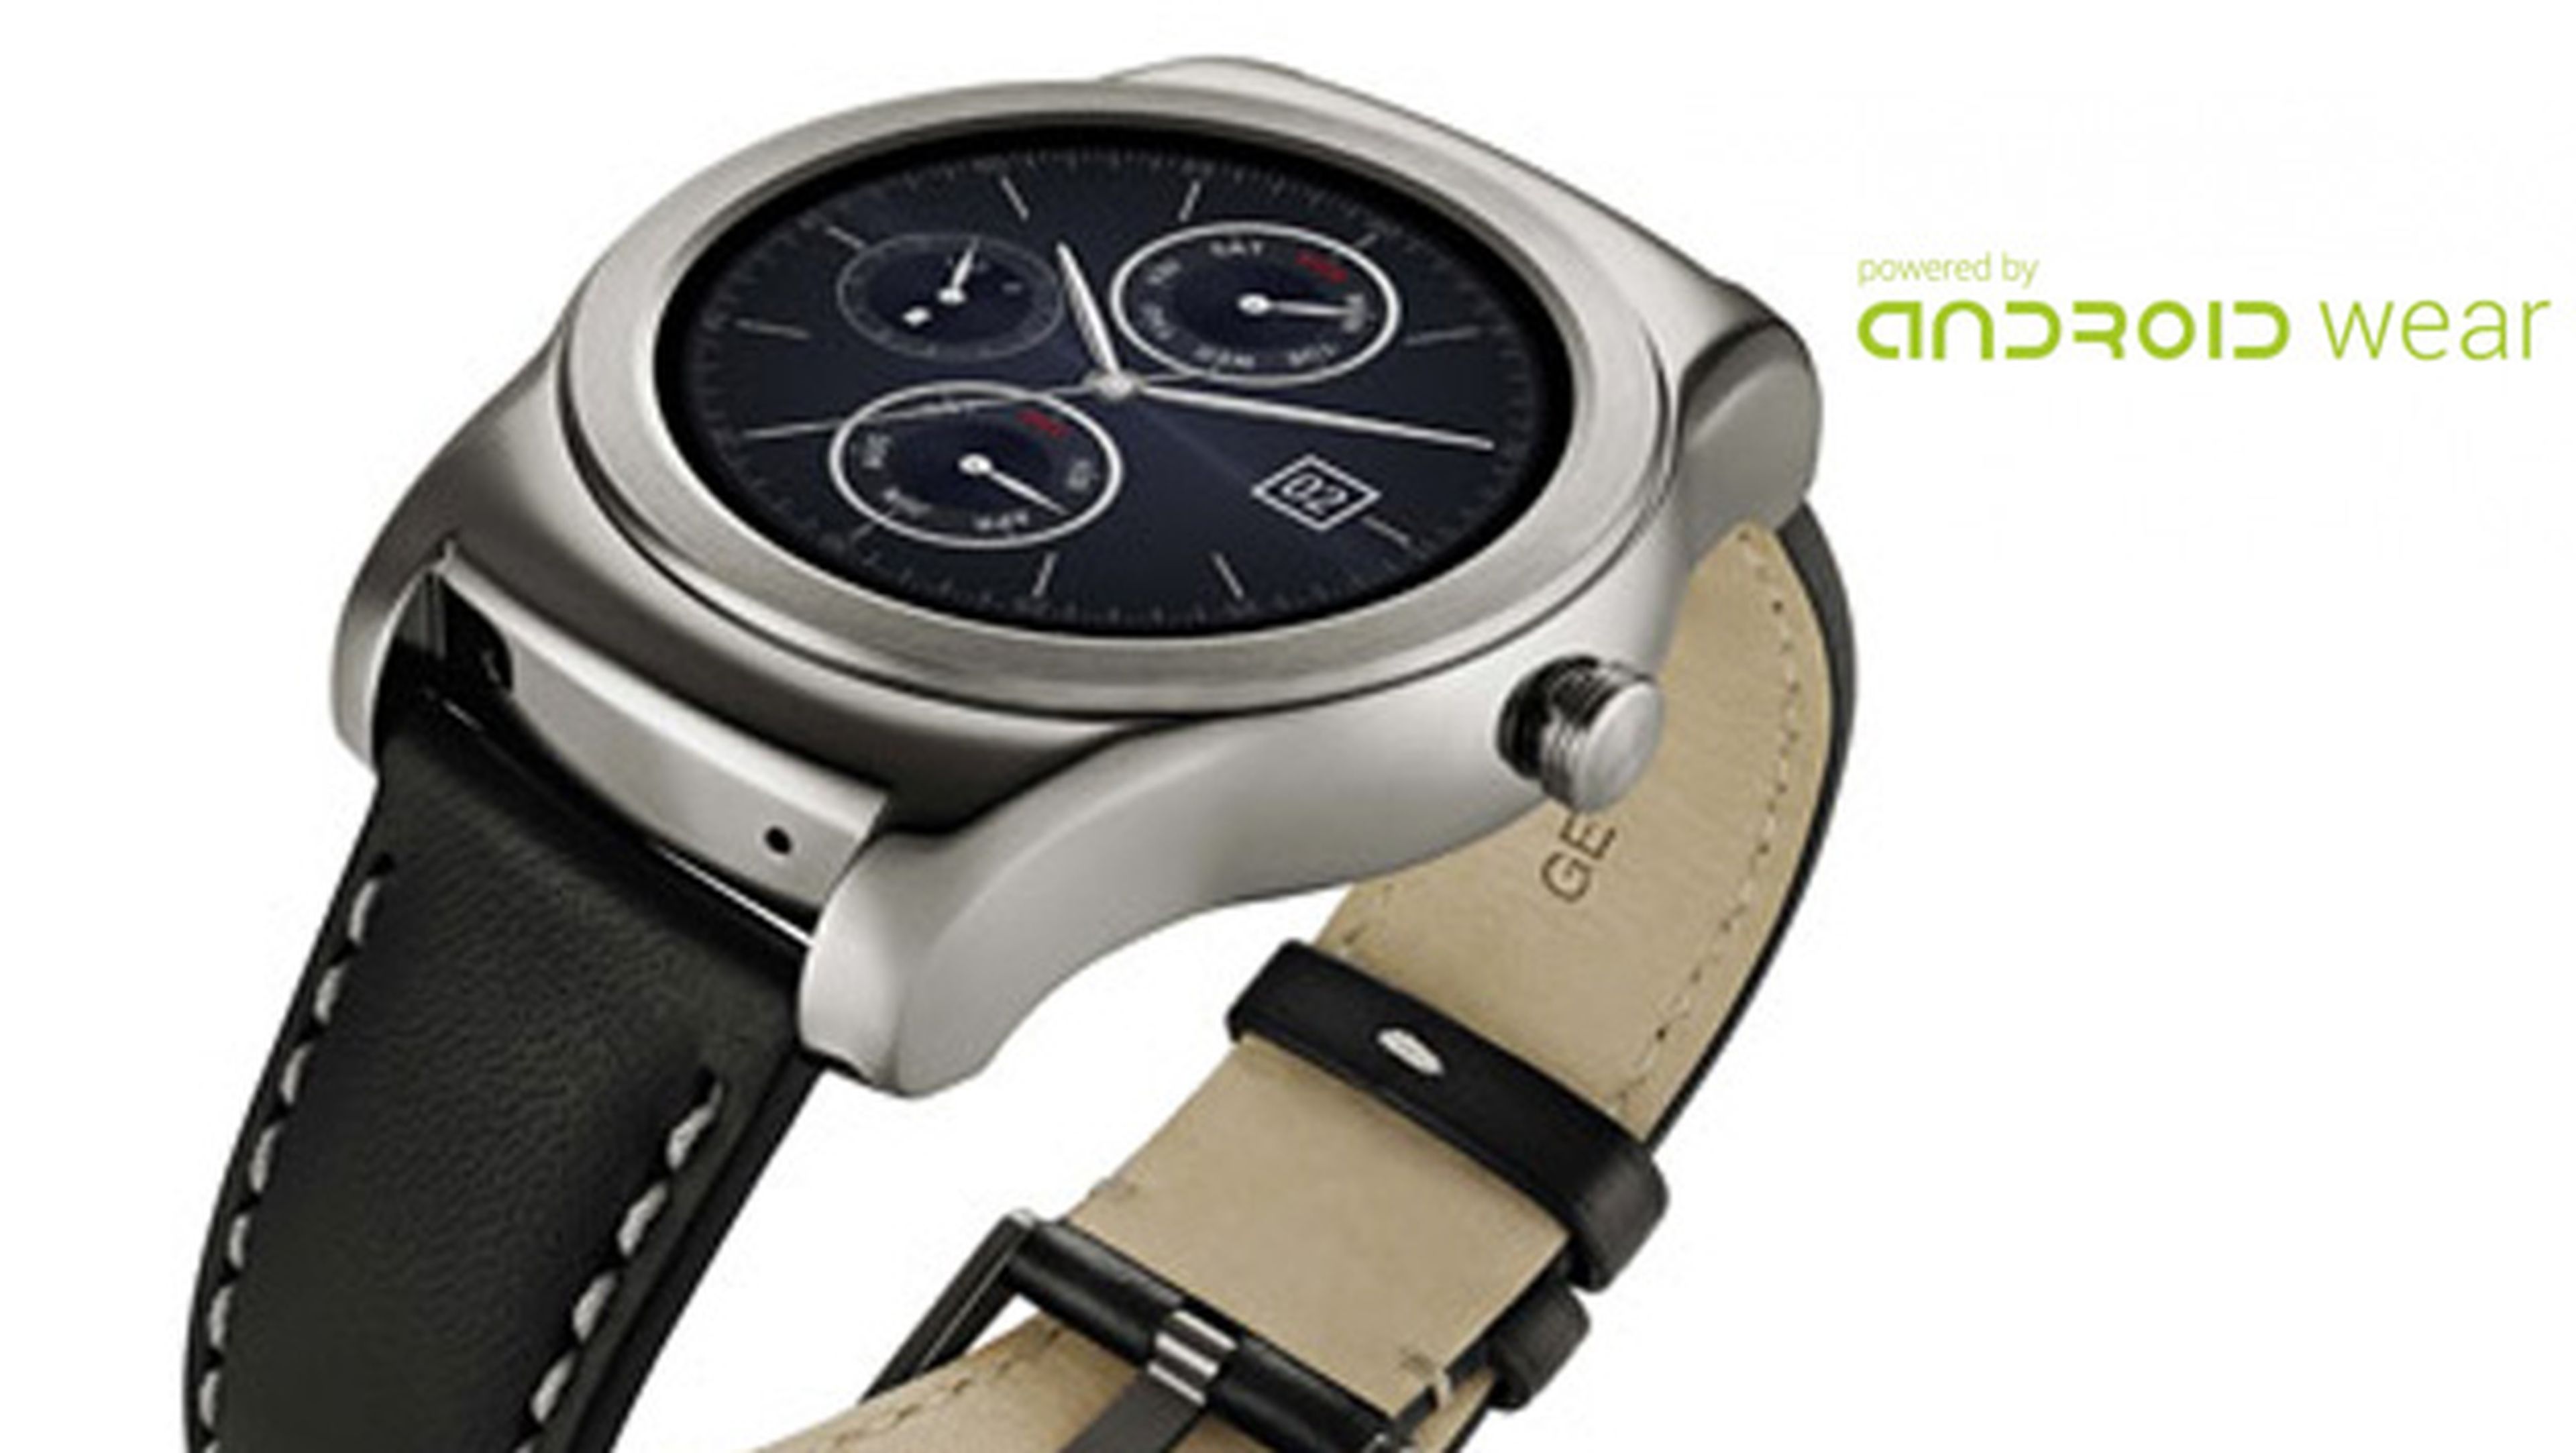 LG urbane con android wear